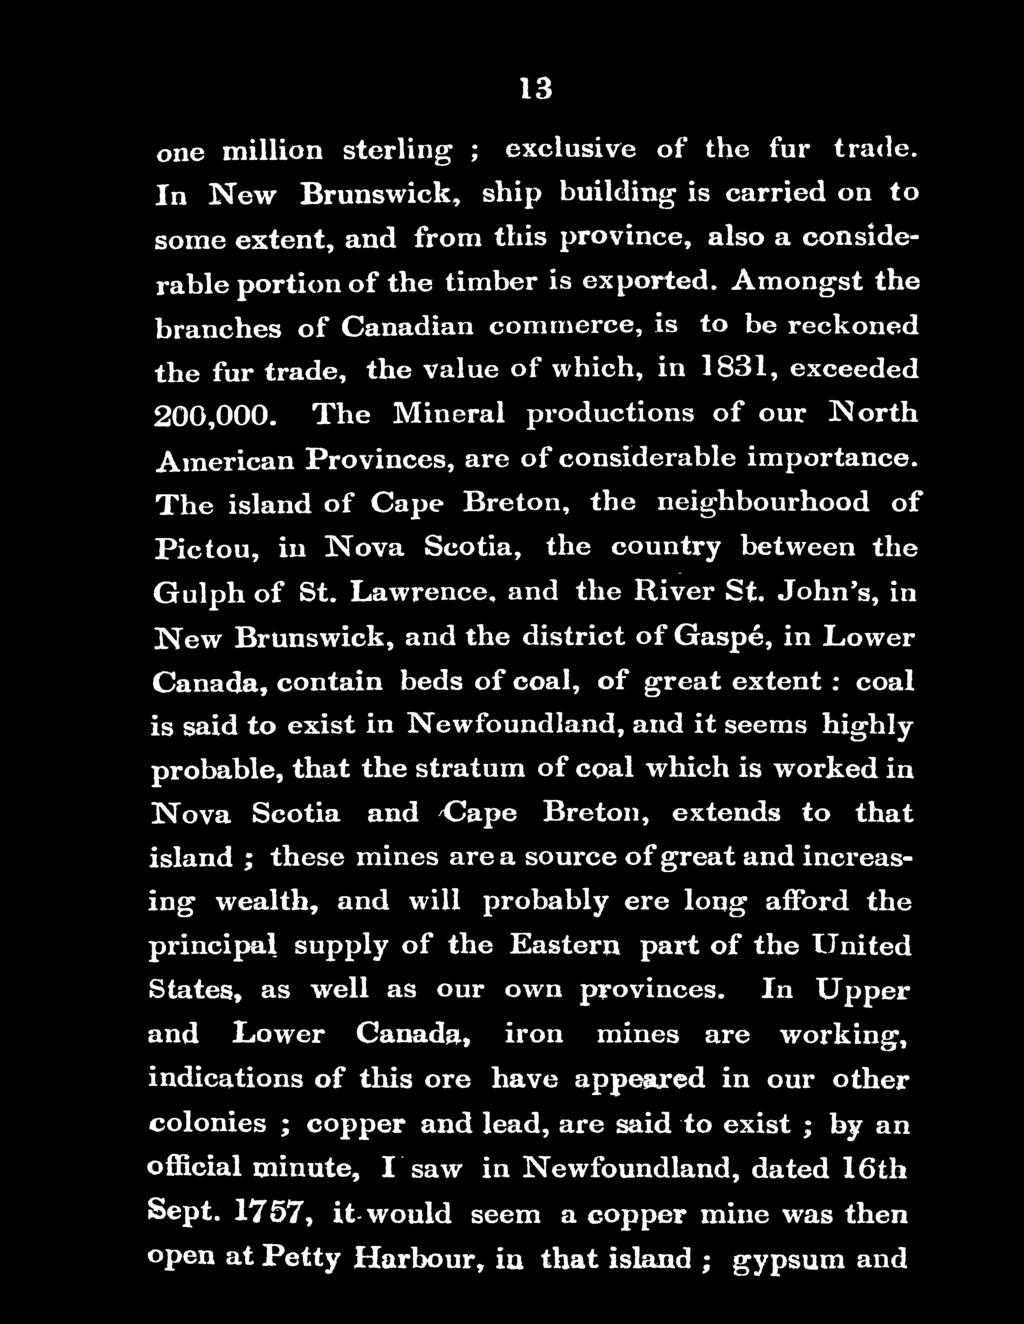 John's, in New Brunswick, and the district of Gaspe, in Lower Canada, contain beds of coal, of great extent : coal is said to exist in Newfoundland, artd it seems highly probable, that the stratum of